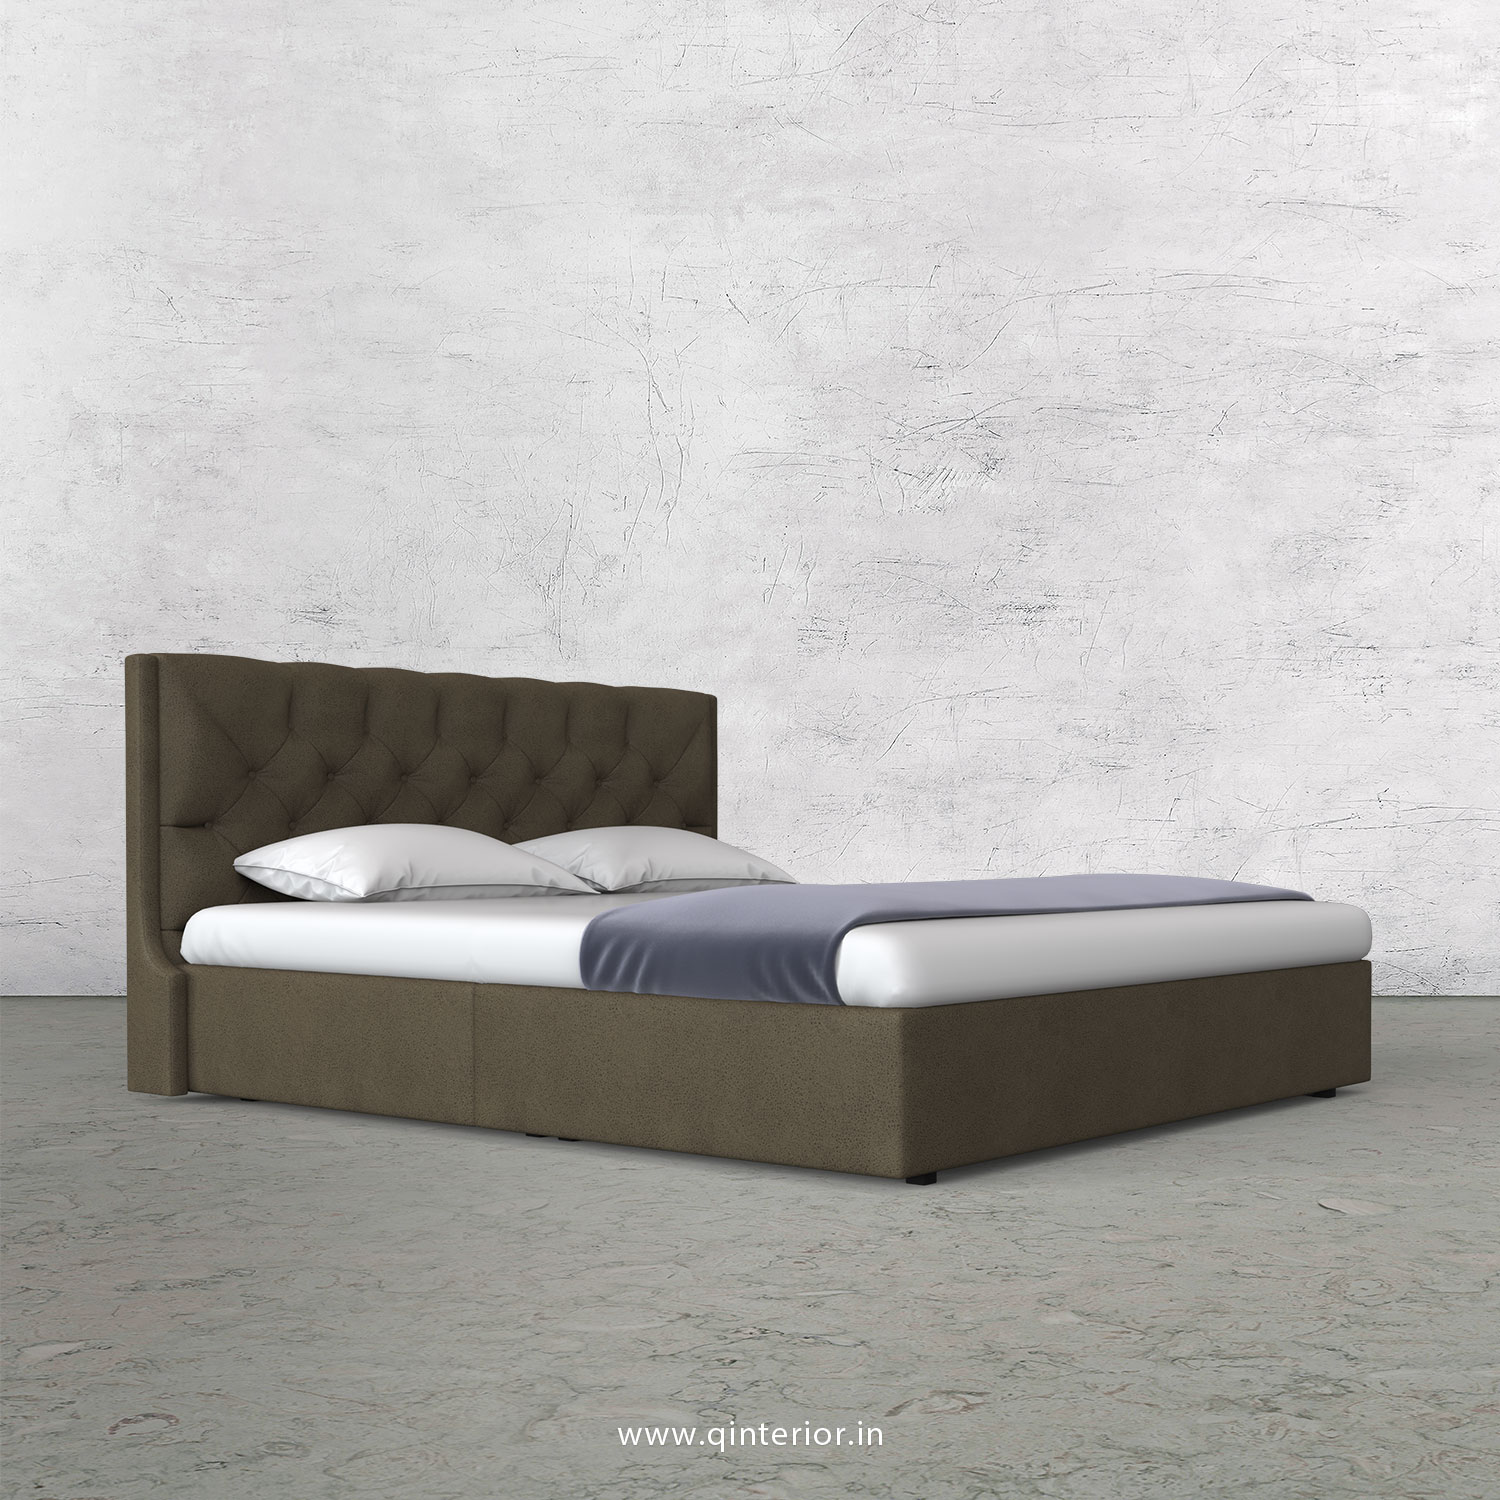 Scorpius King Size Bed in Fab Leather Fabric - KBD009 FL06